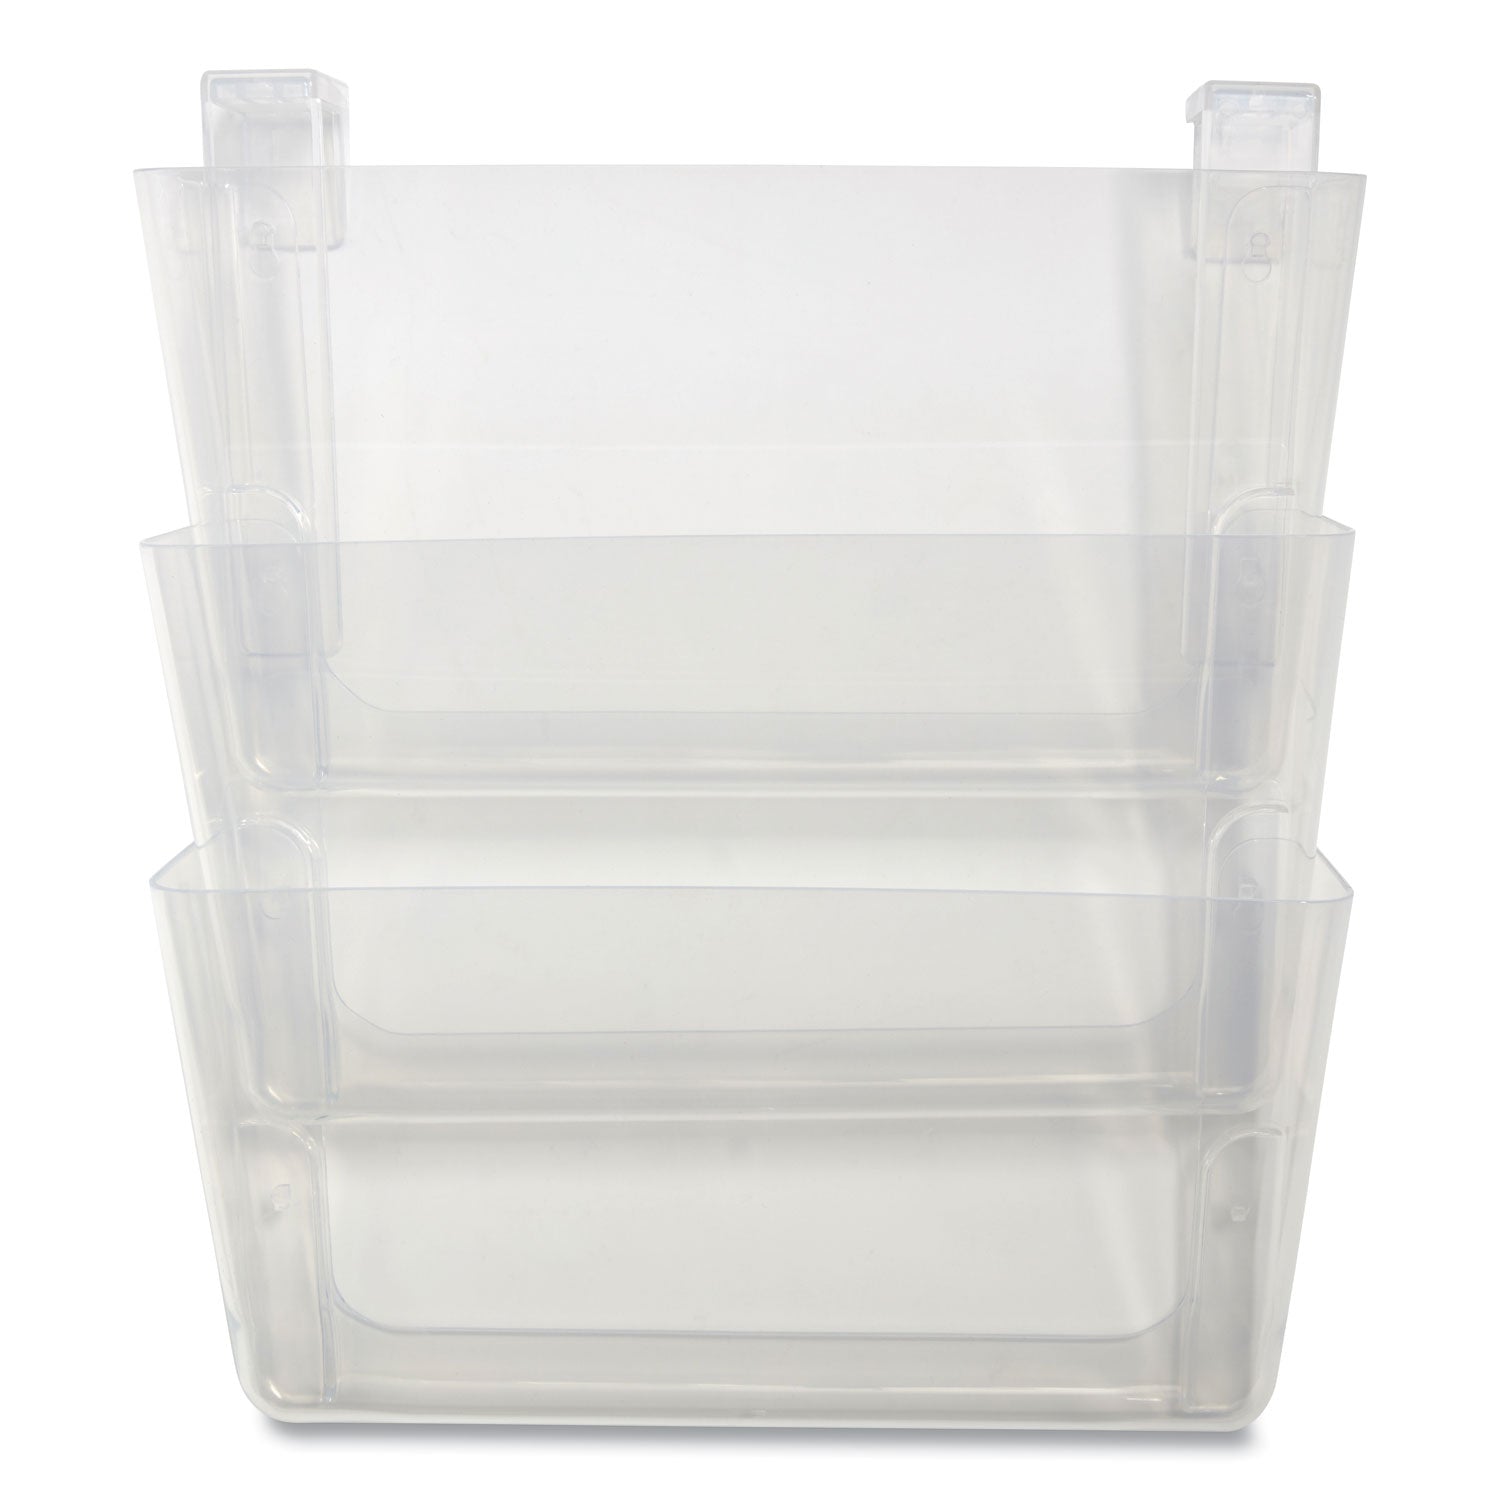 unbreakable-plastic-wall-file-3-sections-letter-size-13-x-374-x-1503-clear_tud24380793 - 1